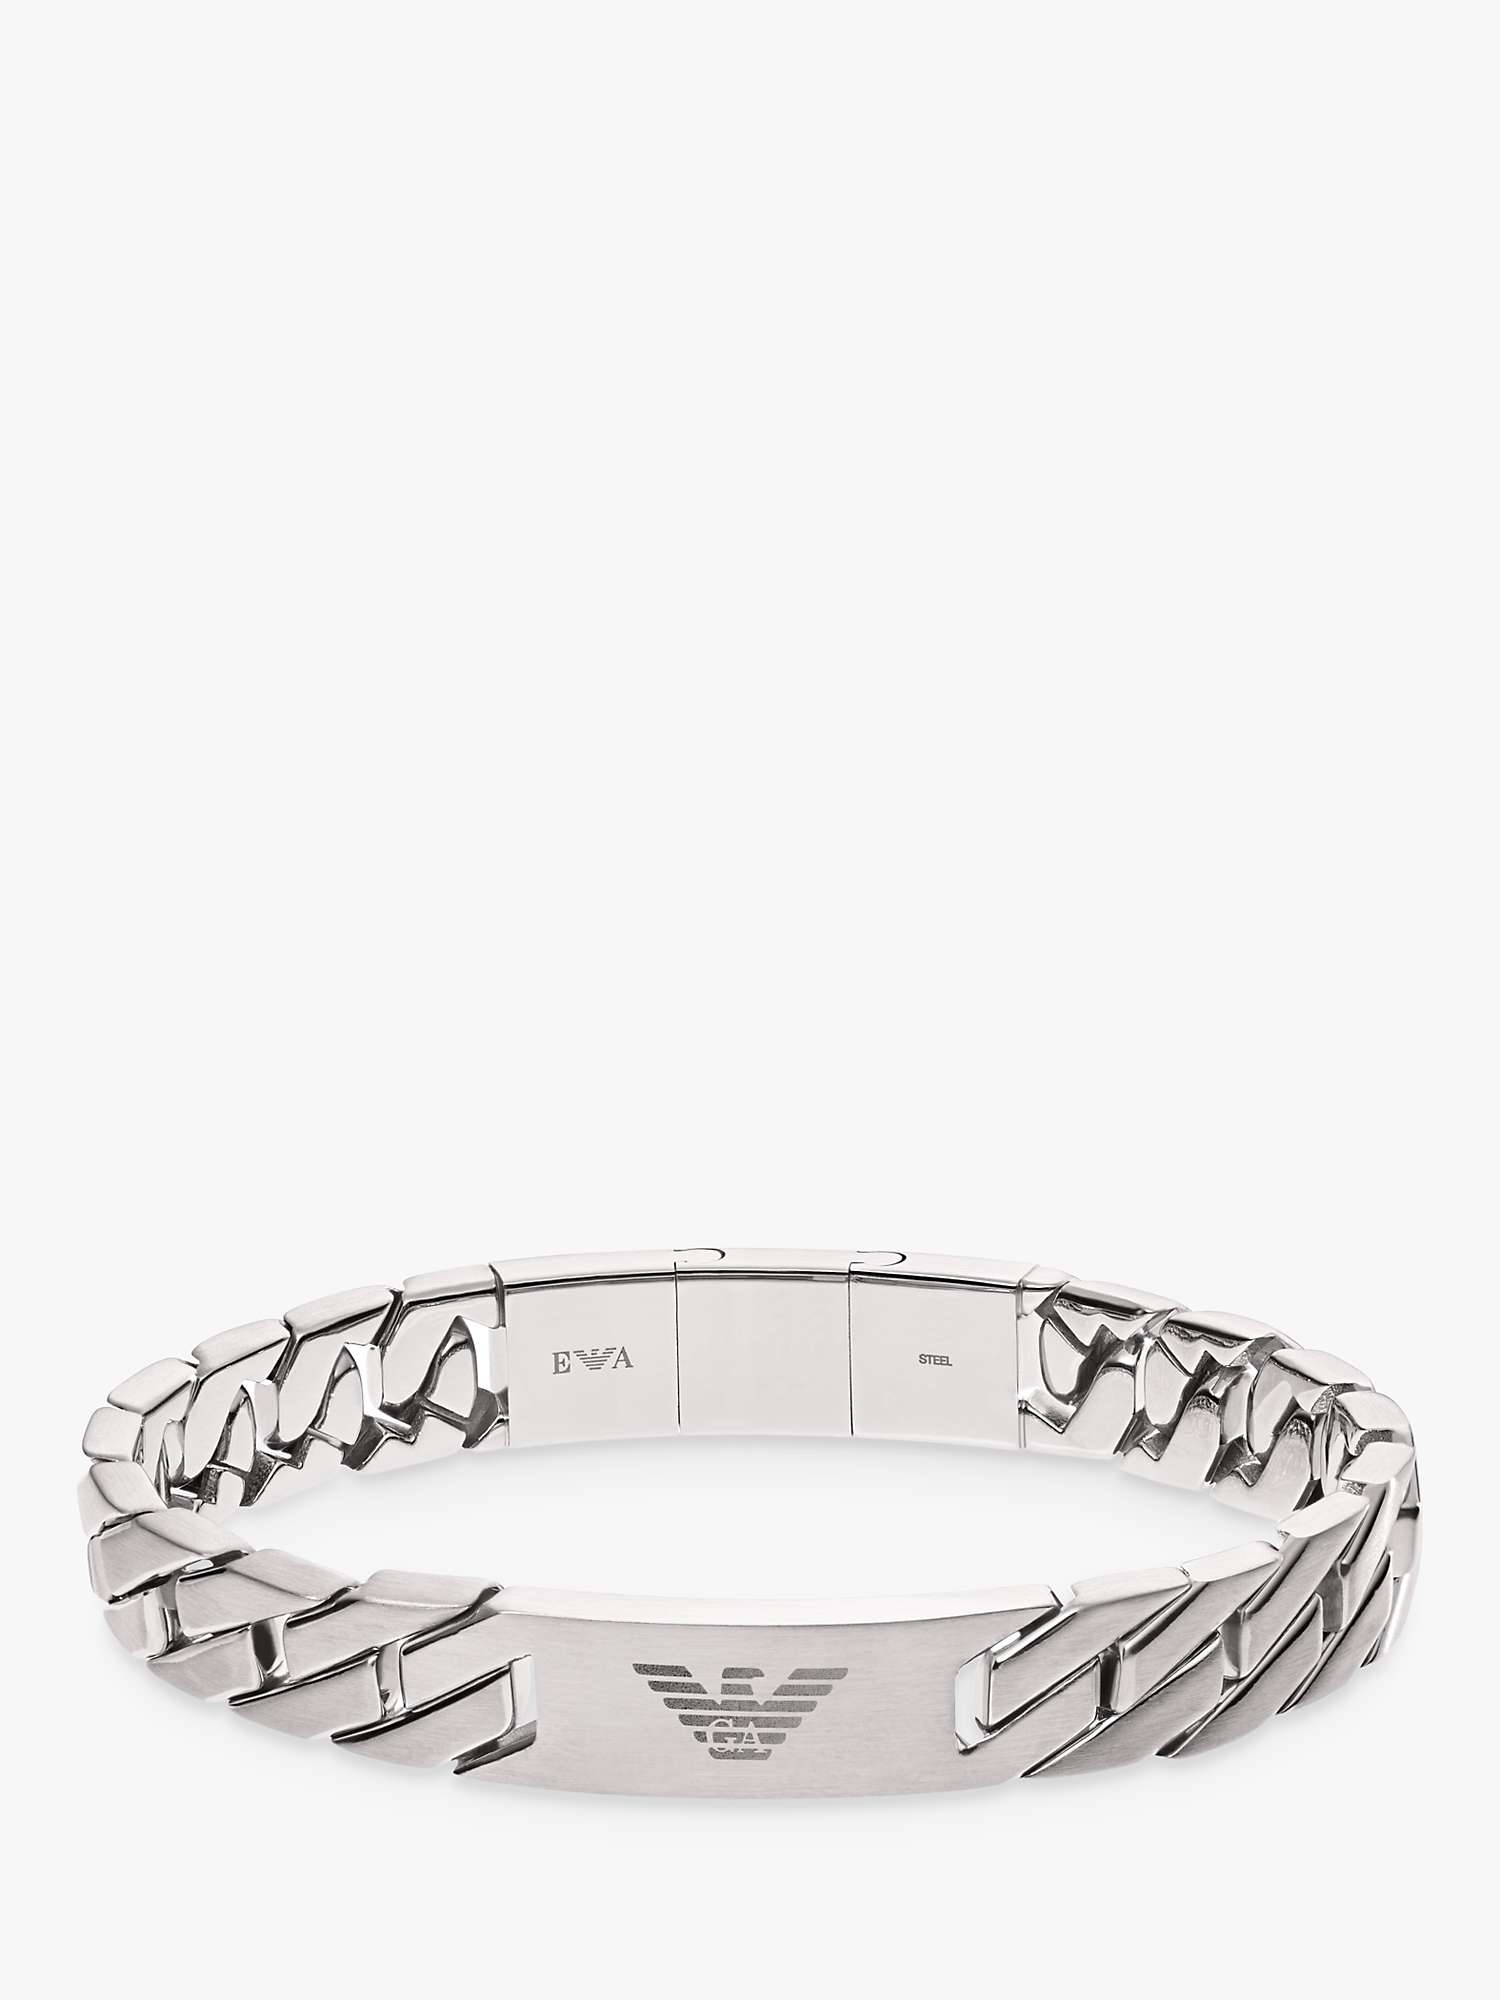 Emporio Armani EGS2435040 Men's Stainless Steel Chain Bracelet, Silver at  John Lewis & Partners